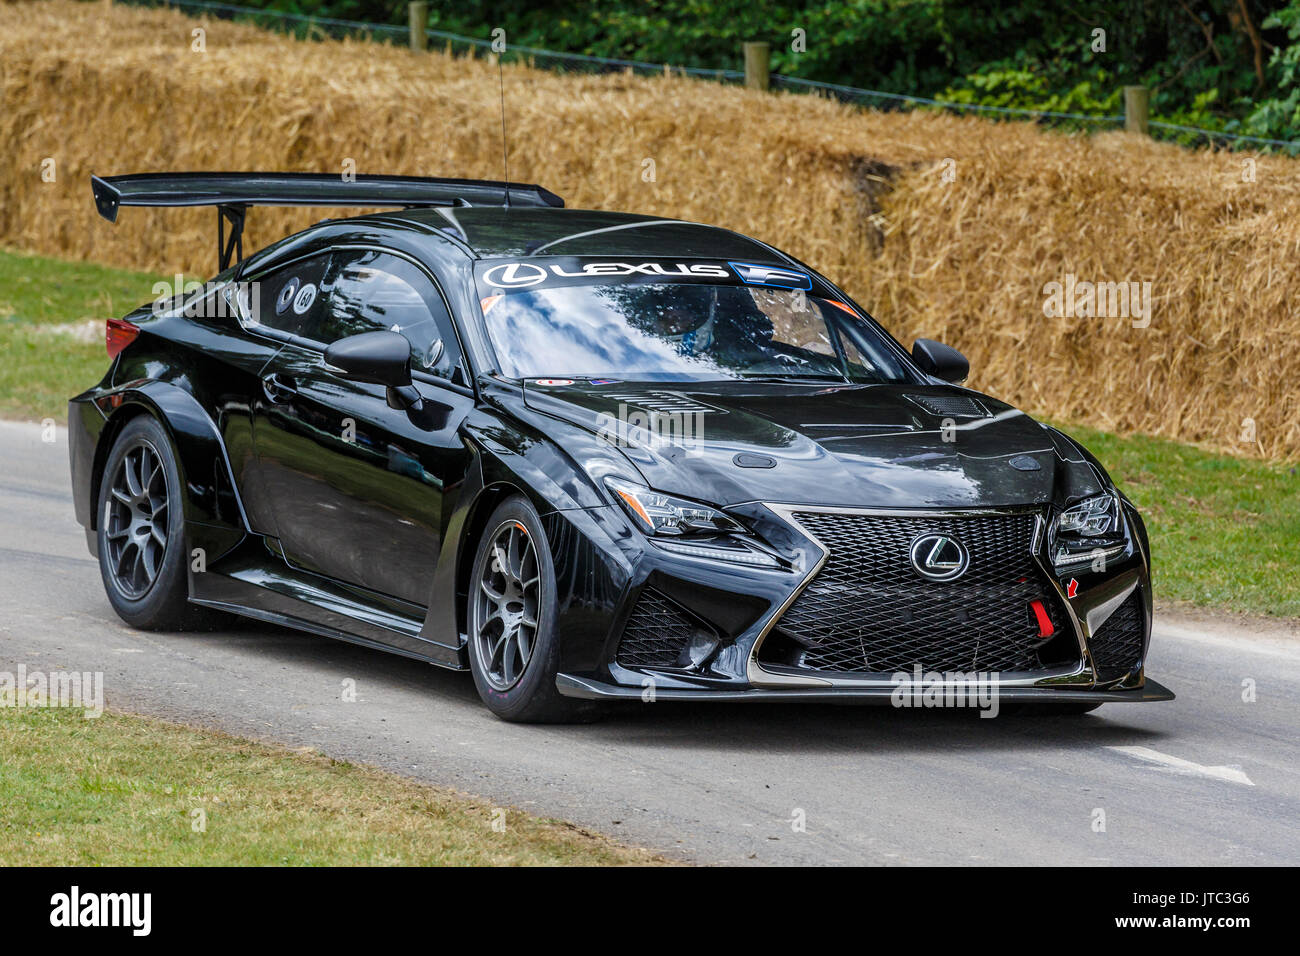 2017 Lexus Rc F Gt Concept Version Of The Gt3 Car With Driver